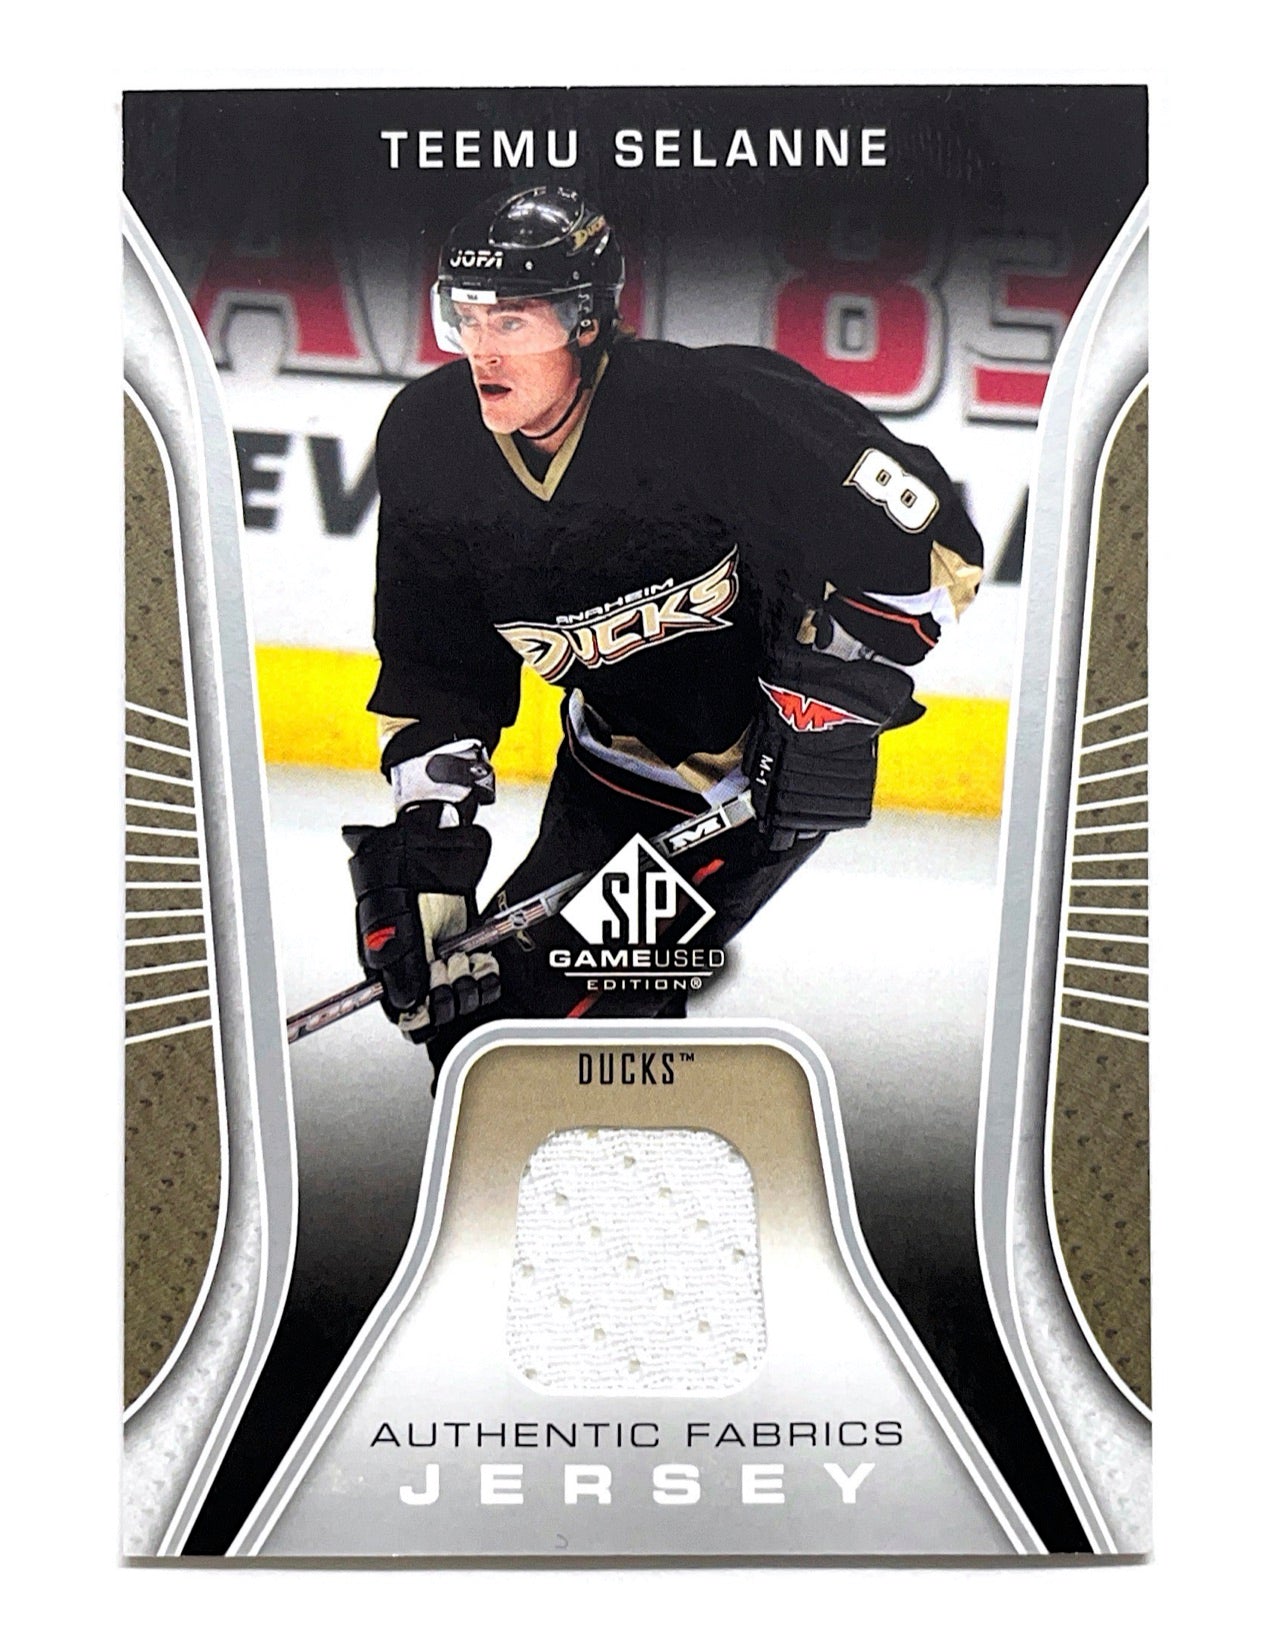 Teemu Selanne 2006-07 Upper Deck SP Game Used Authentic Fabrics Jersey #AF-TS